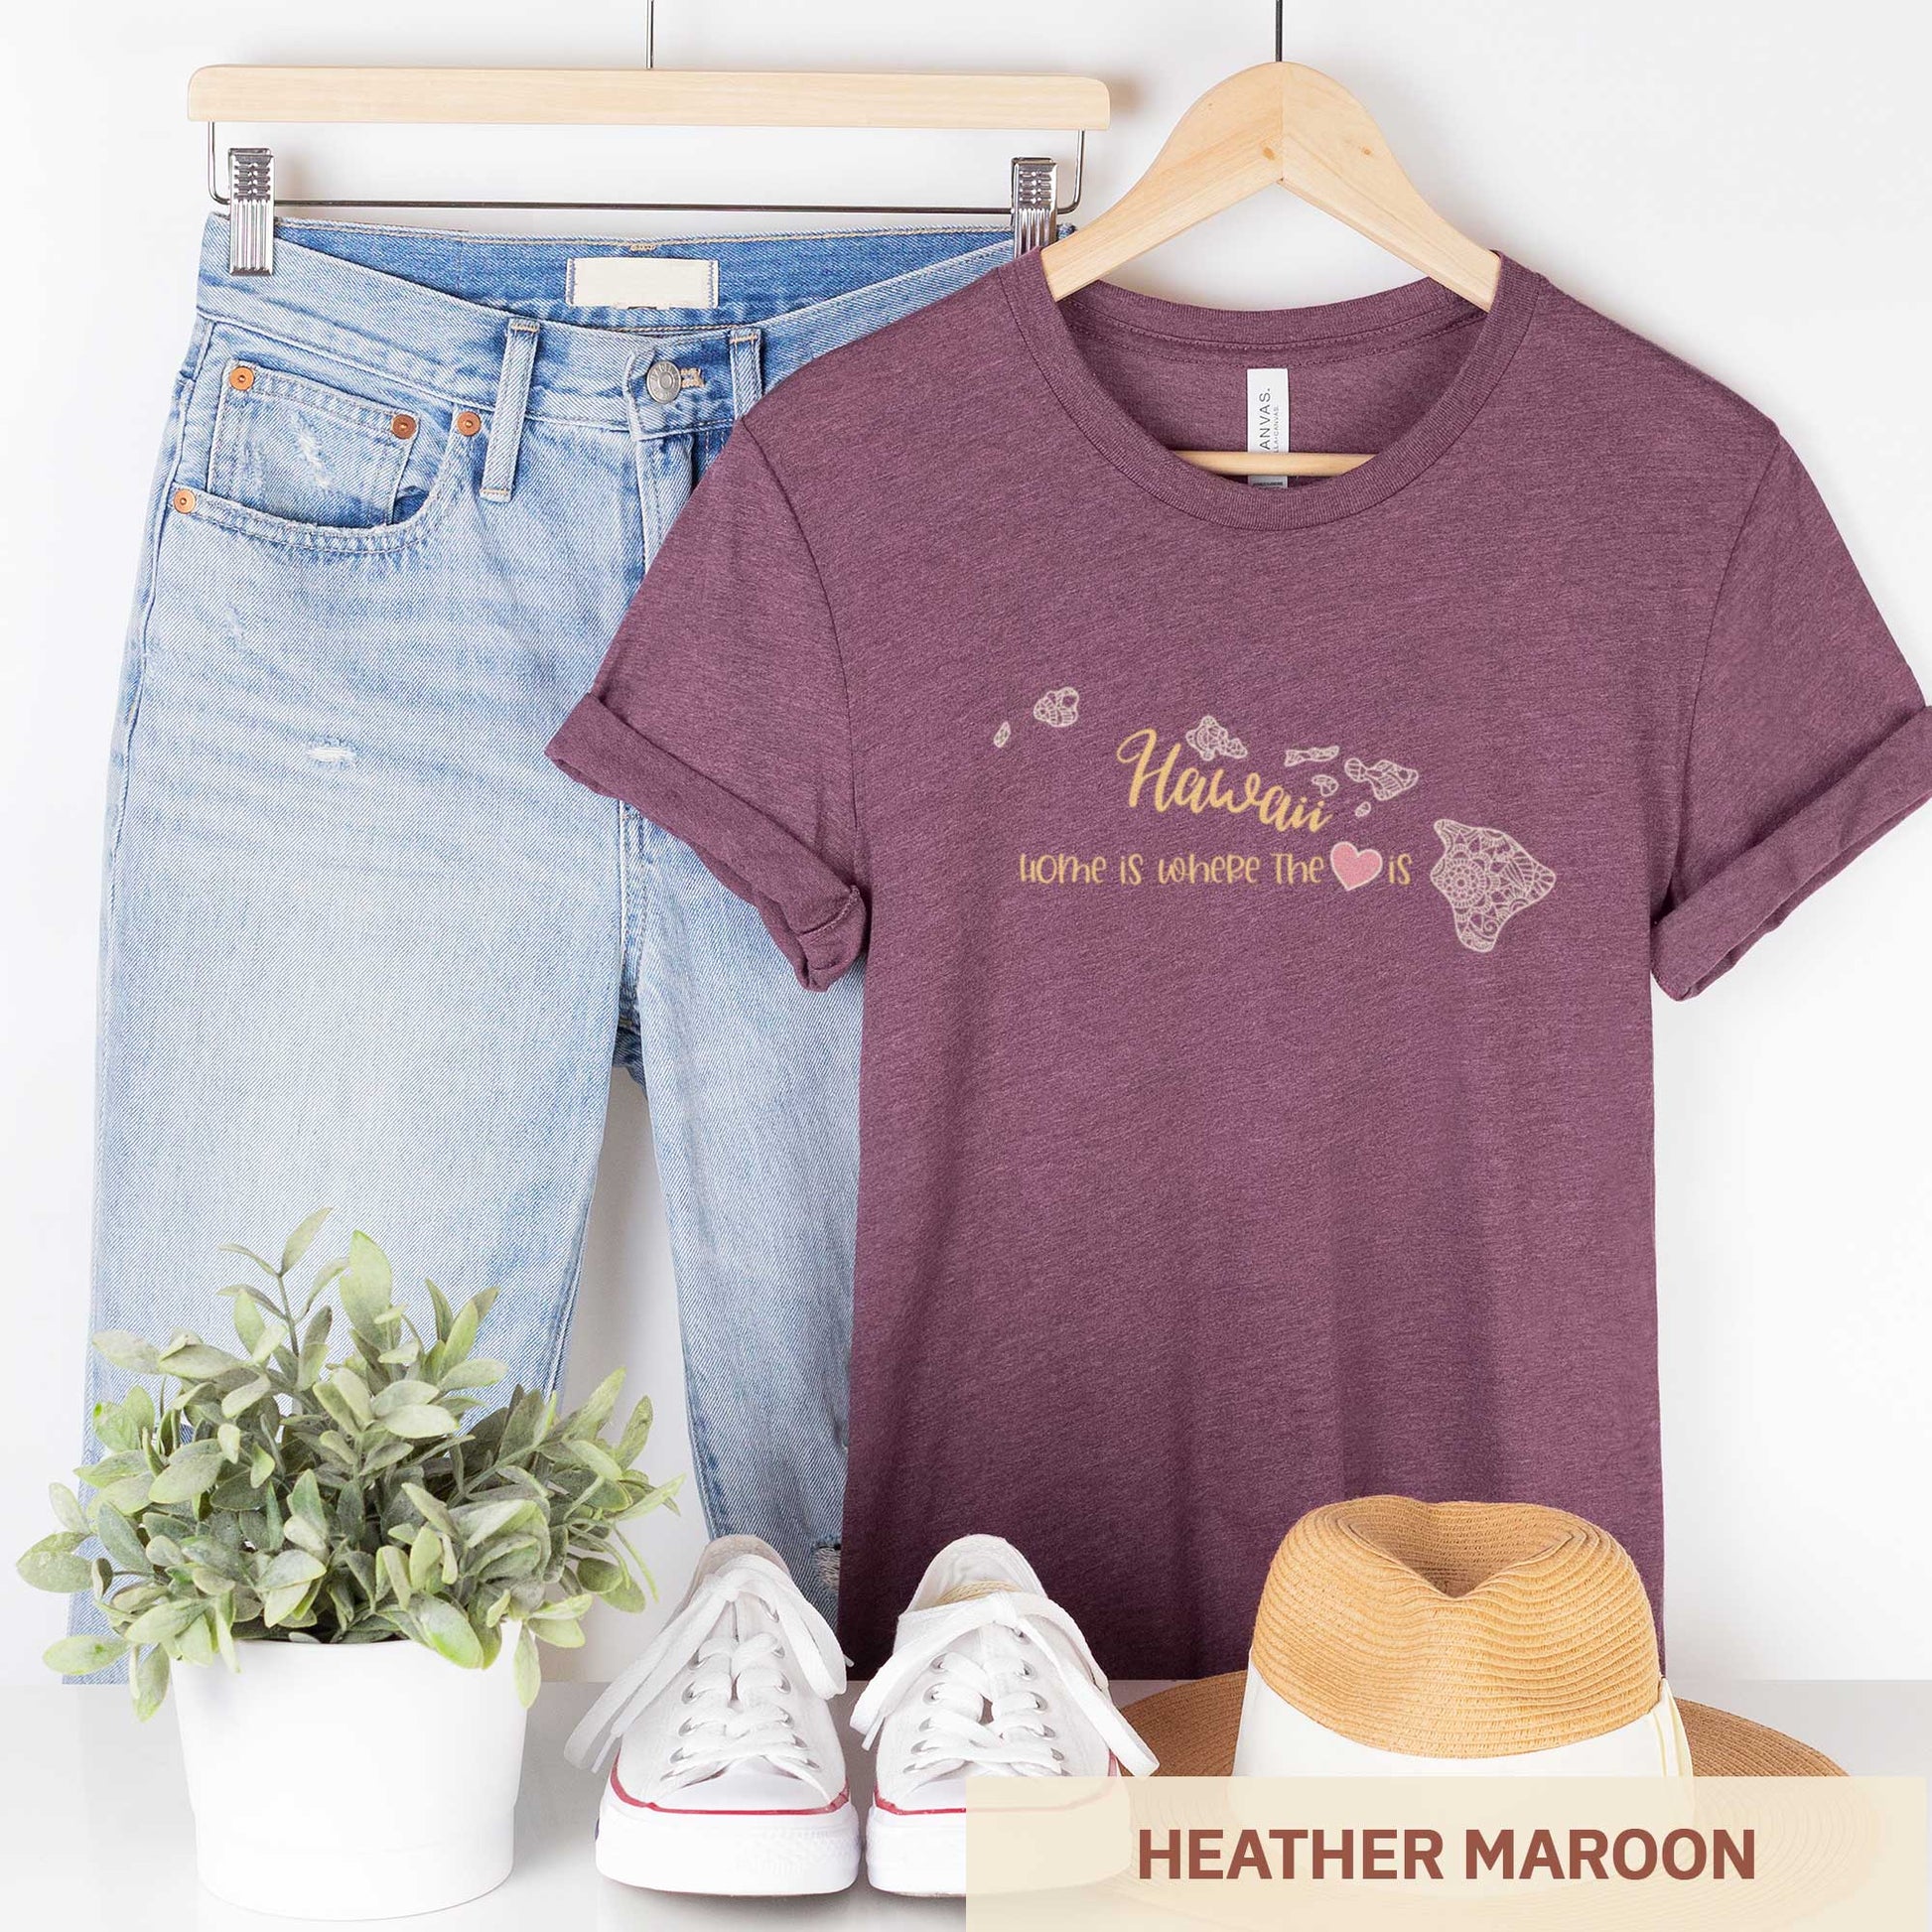 A hanging heather maroon Bella Canvas t-shirt featuring a mandala in the shape of Hawaii with the words home is where the heart is.